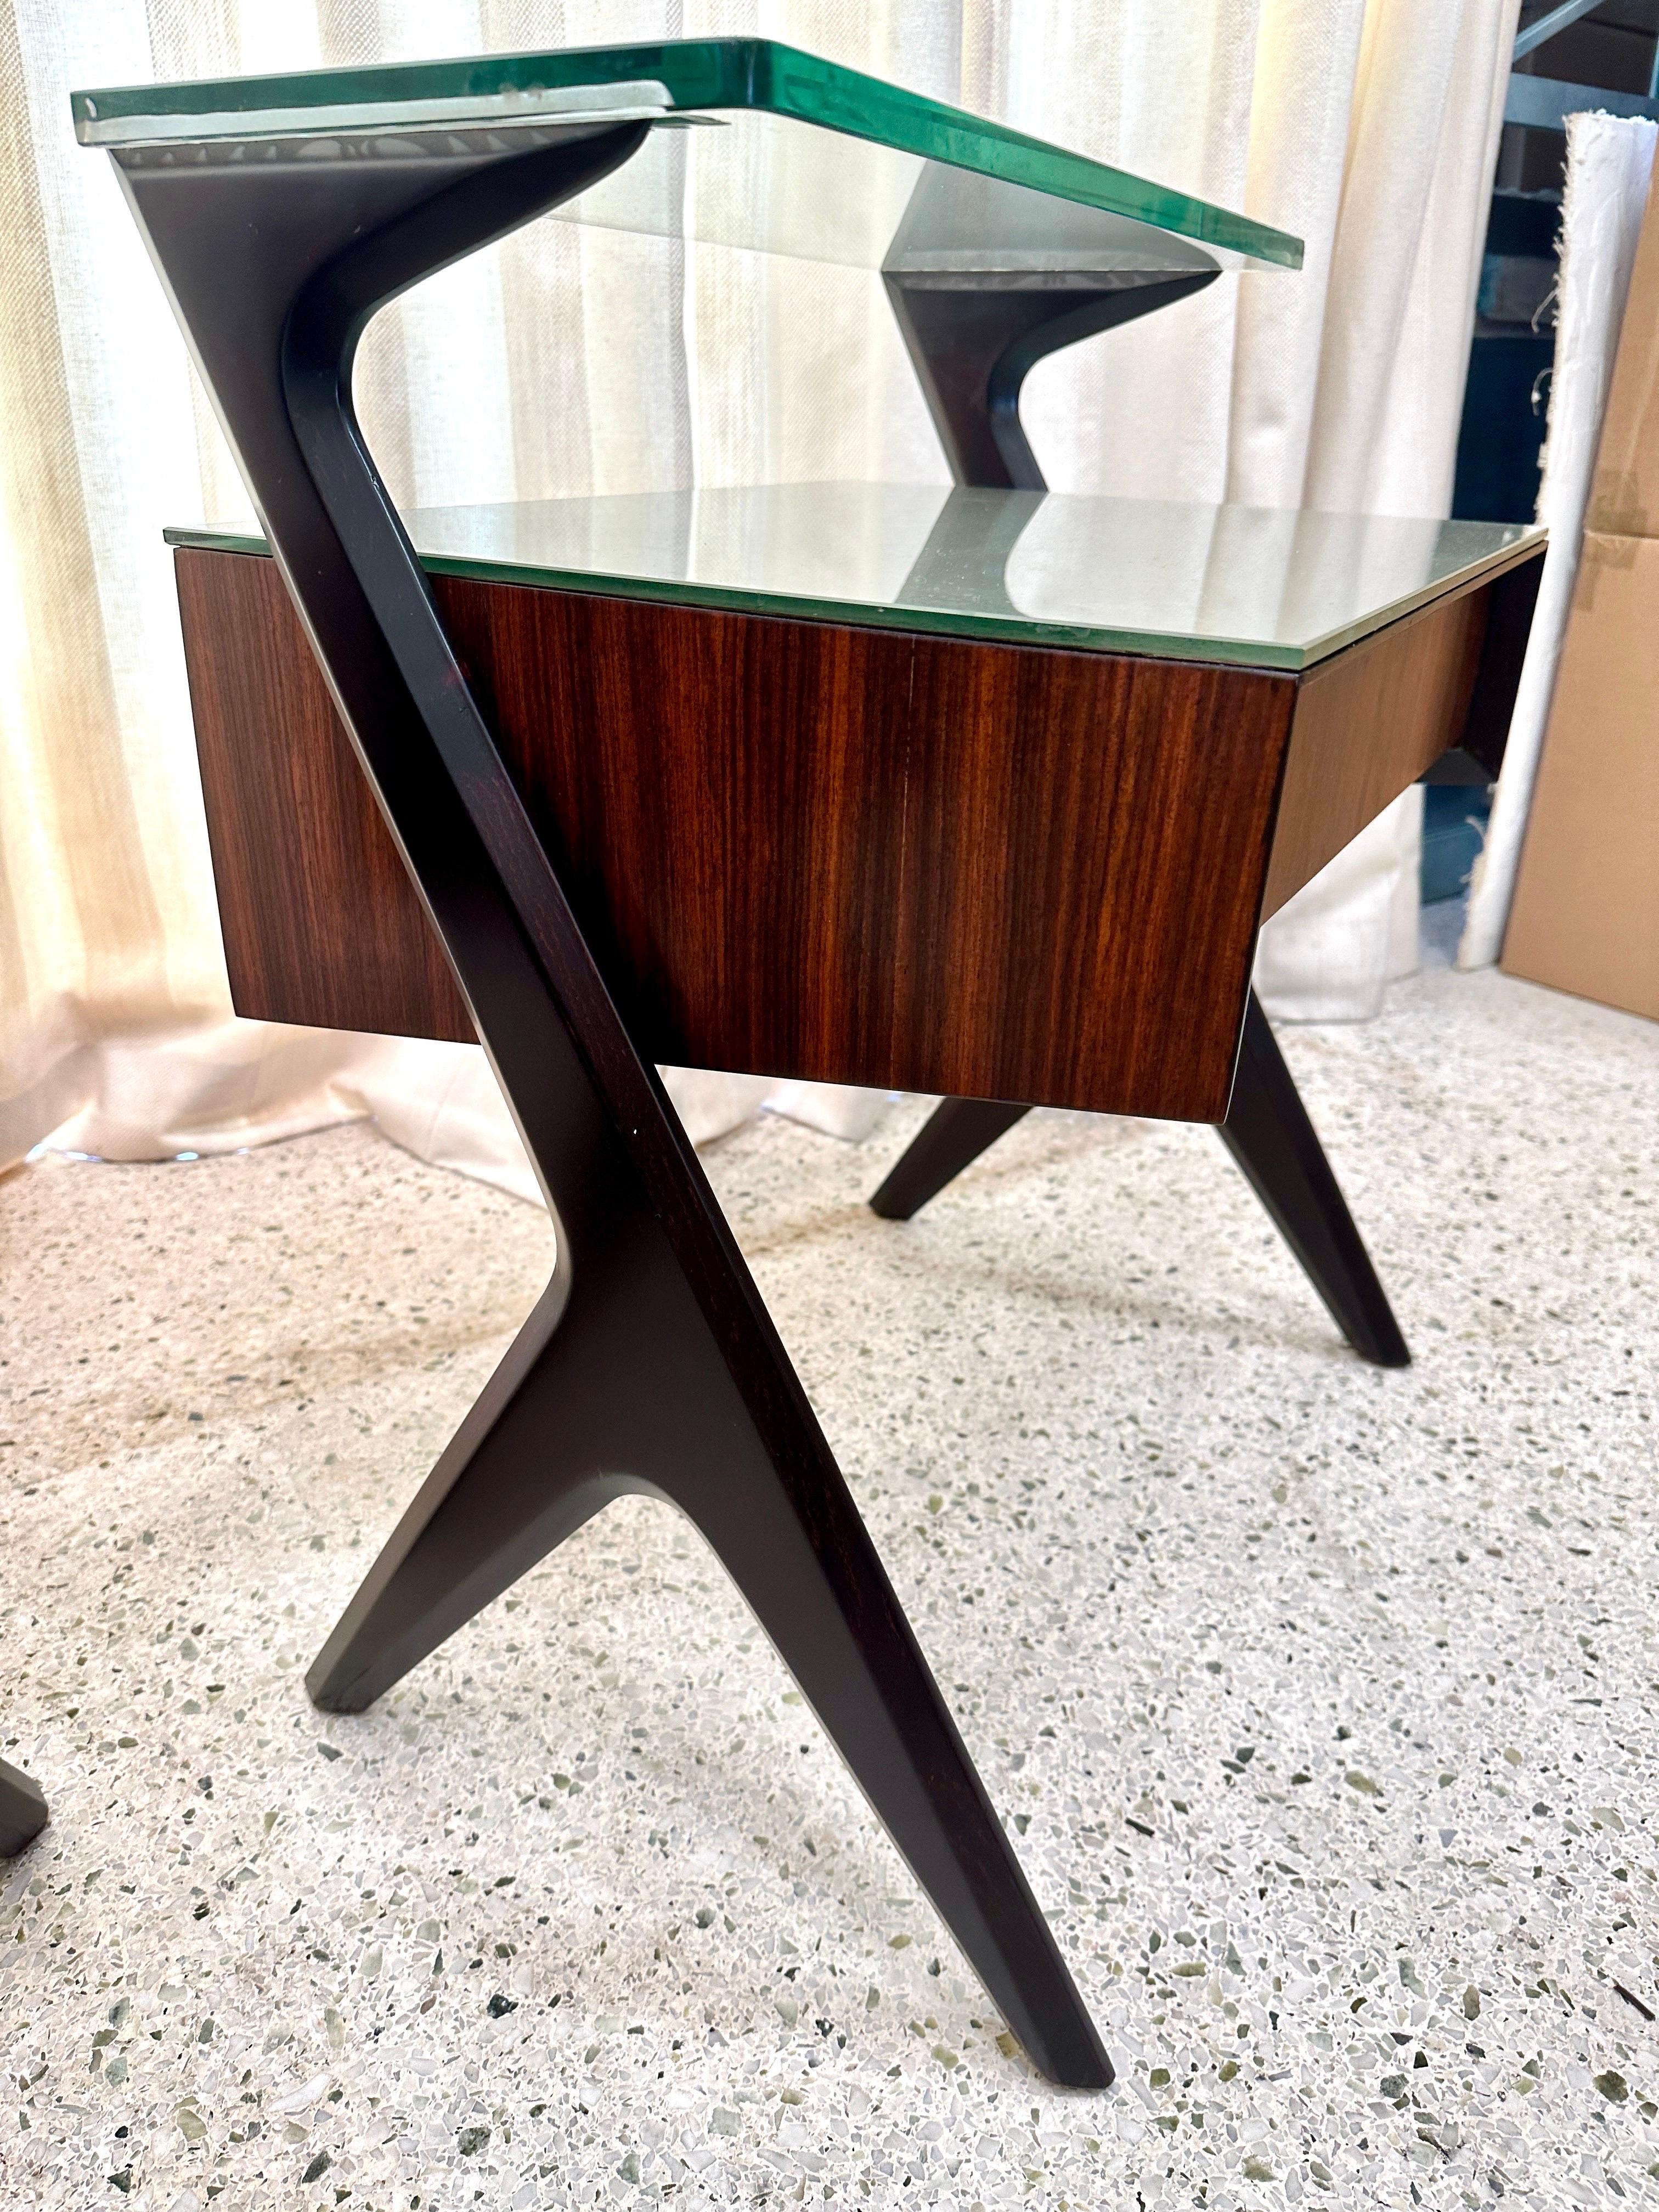 Stunning Side-Tables or Night Stands designed by Vittorio & Plinio Dassi in the 1950s. Its aesthetic uniqueness is given by the original sculptural shape design of the drawers and lateral supports, in addition with the gray reverse painted glass